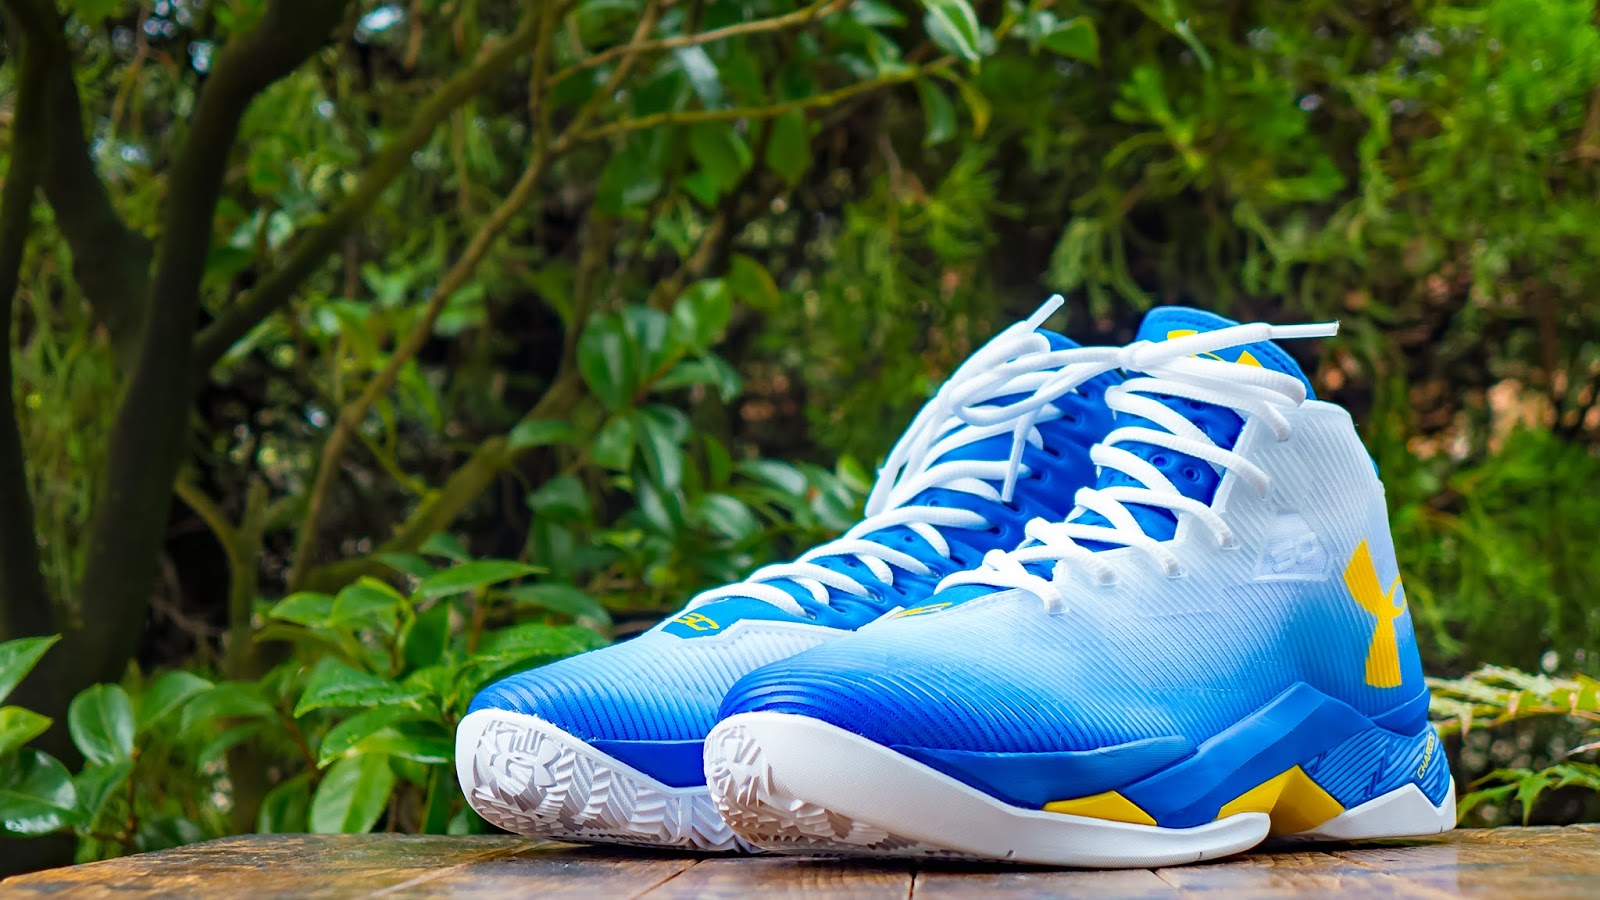 Under Armour Curry 2.5 Performance Review | SZOK